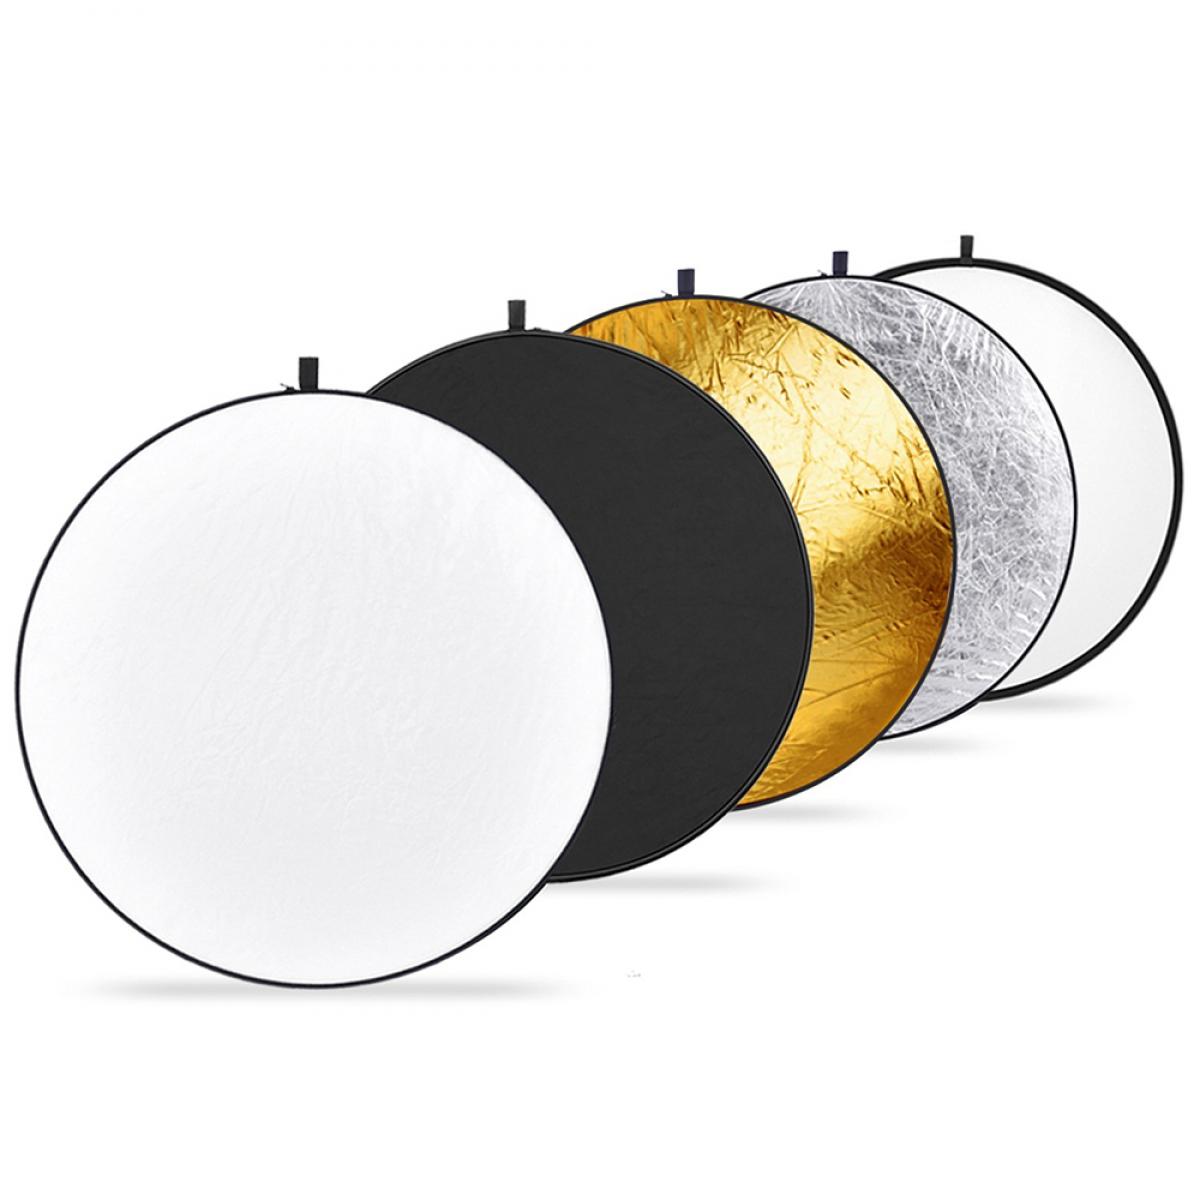 Photo Video Lighting 150 x 100cm 5 in 1 Collapsible Multi Ellipse Reflector 